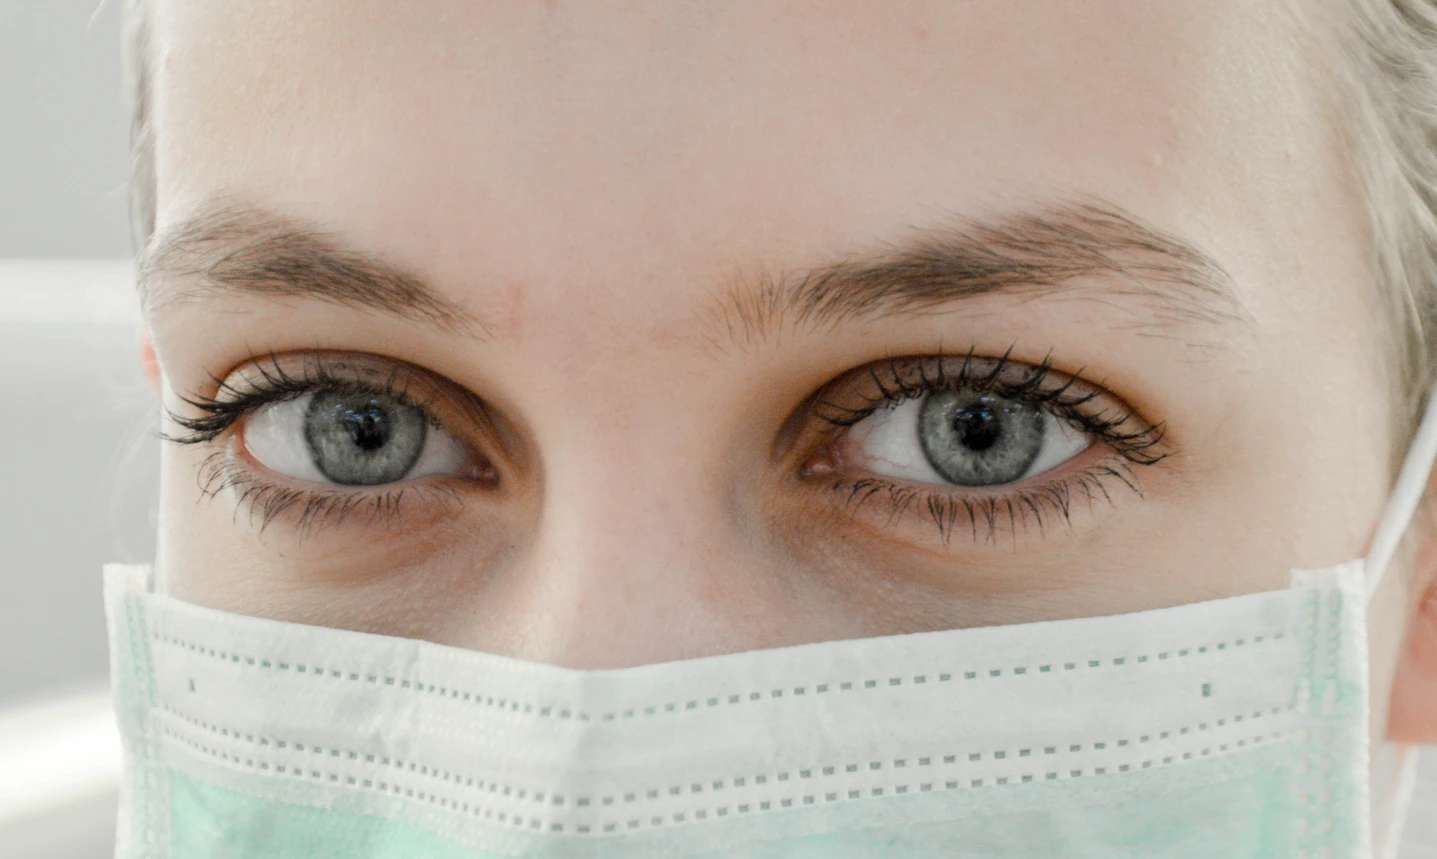 Woman wearing surgical mask